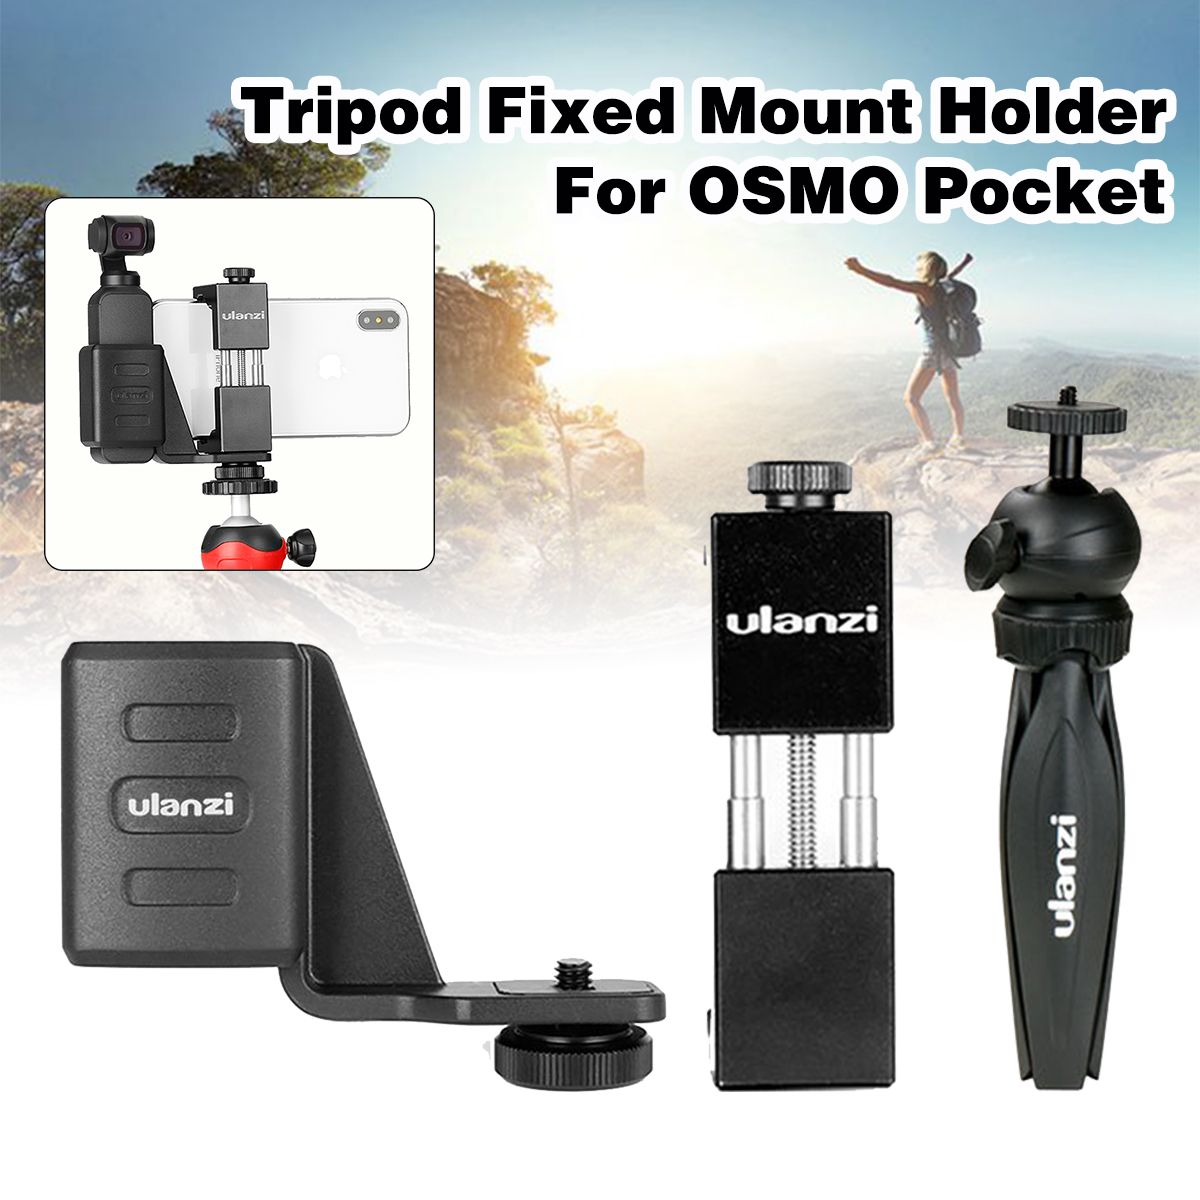 Bakeey-Tripod-Fixed-Bracket-Mount-Phone-Holder-Stand-for-OSMO-Pocket-Camera-for-Mobile-Phone-1420430